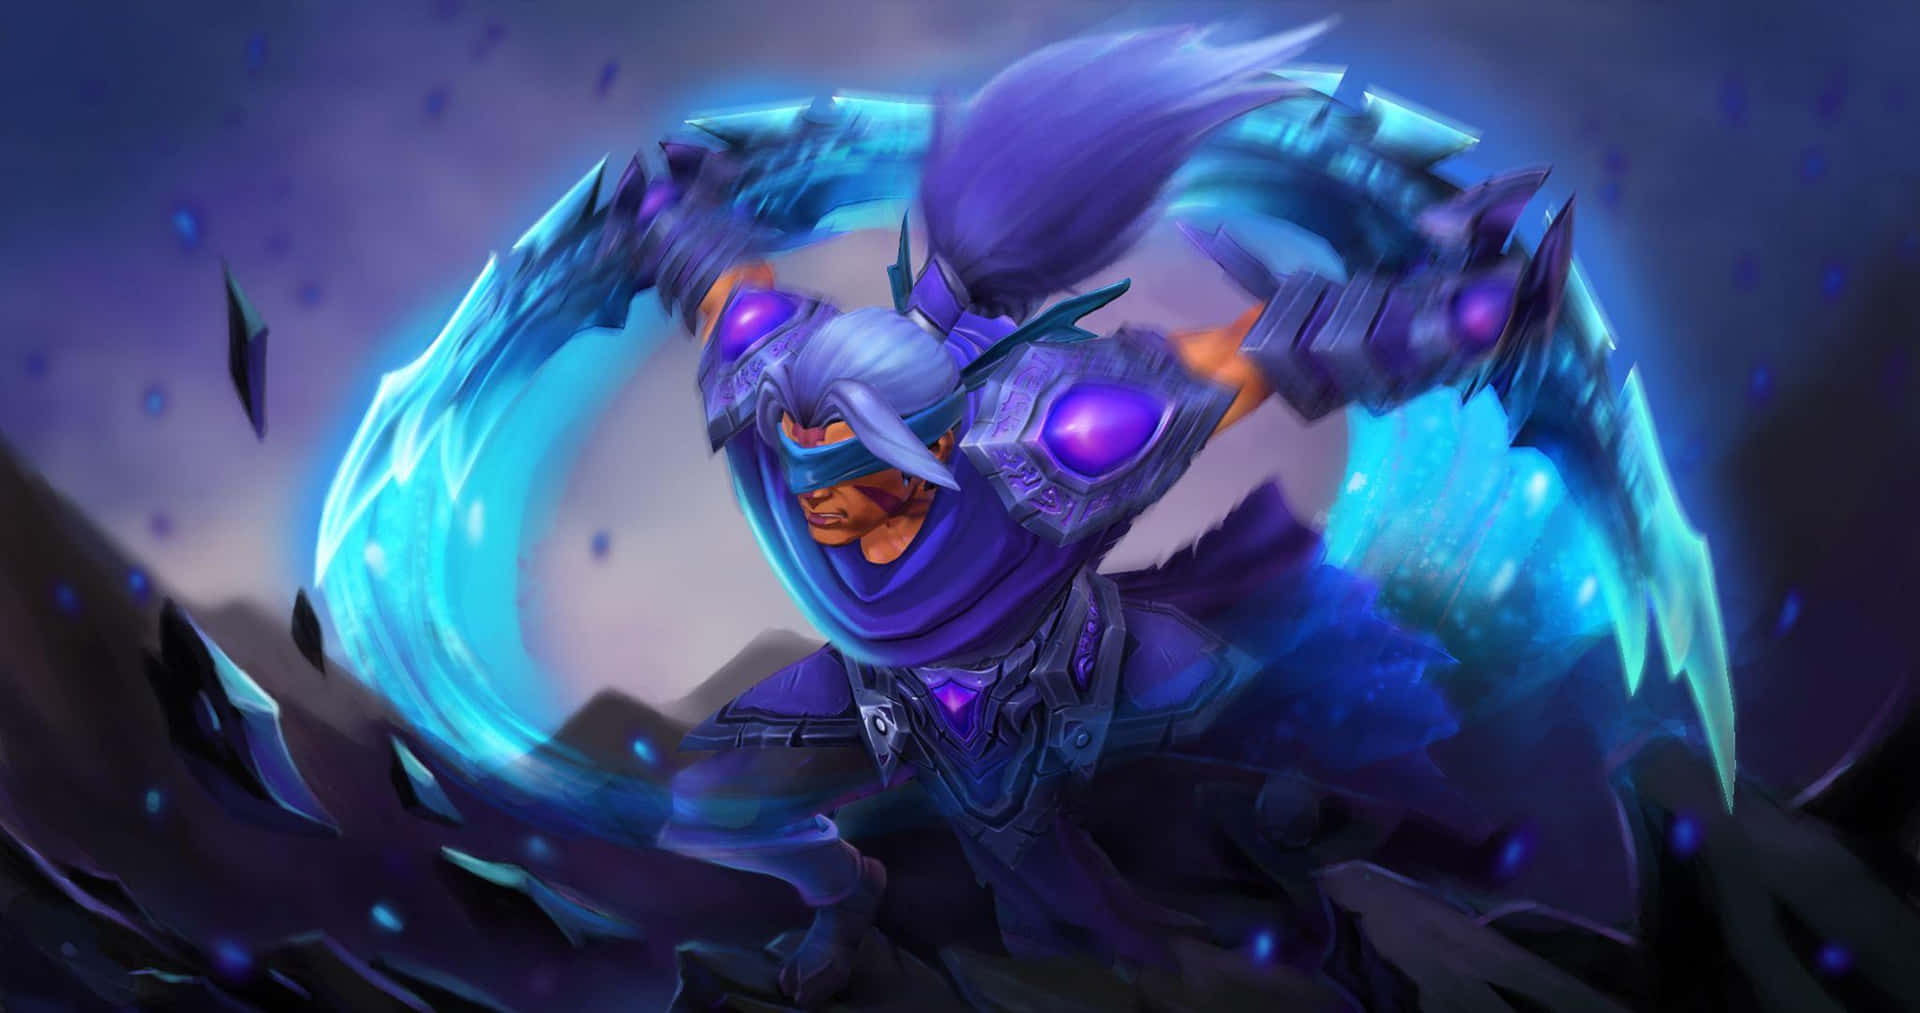 Powerful Anti-Mage in Action Wallpaper